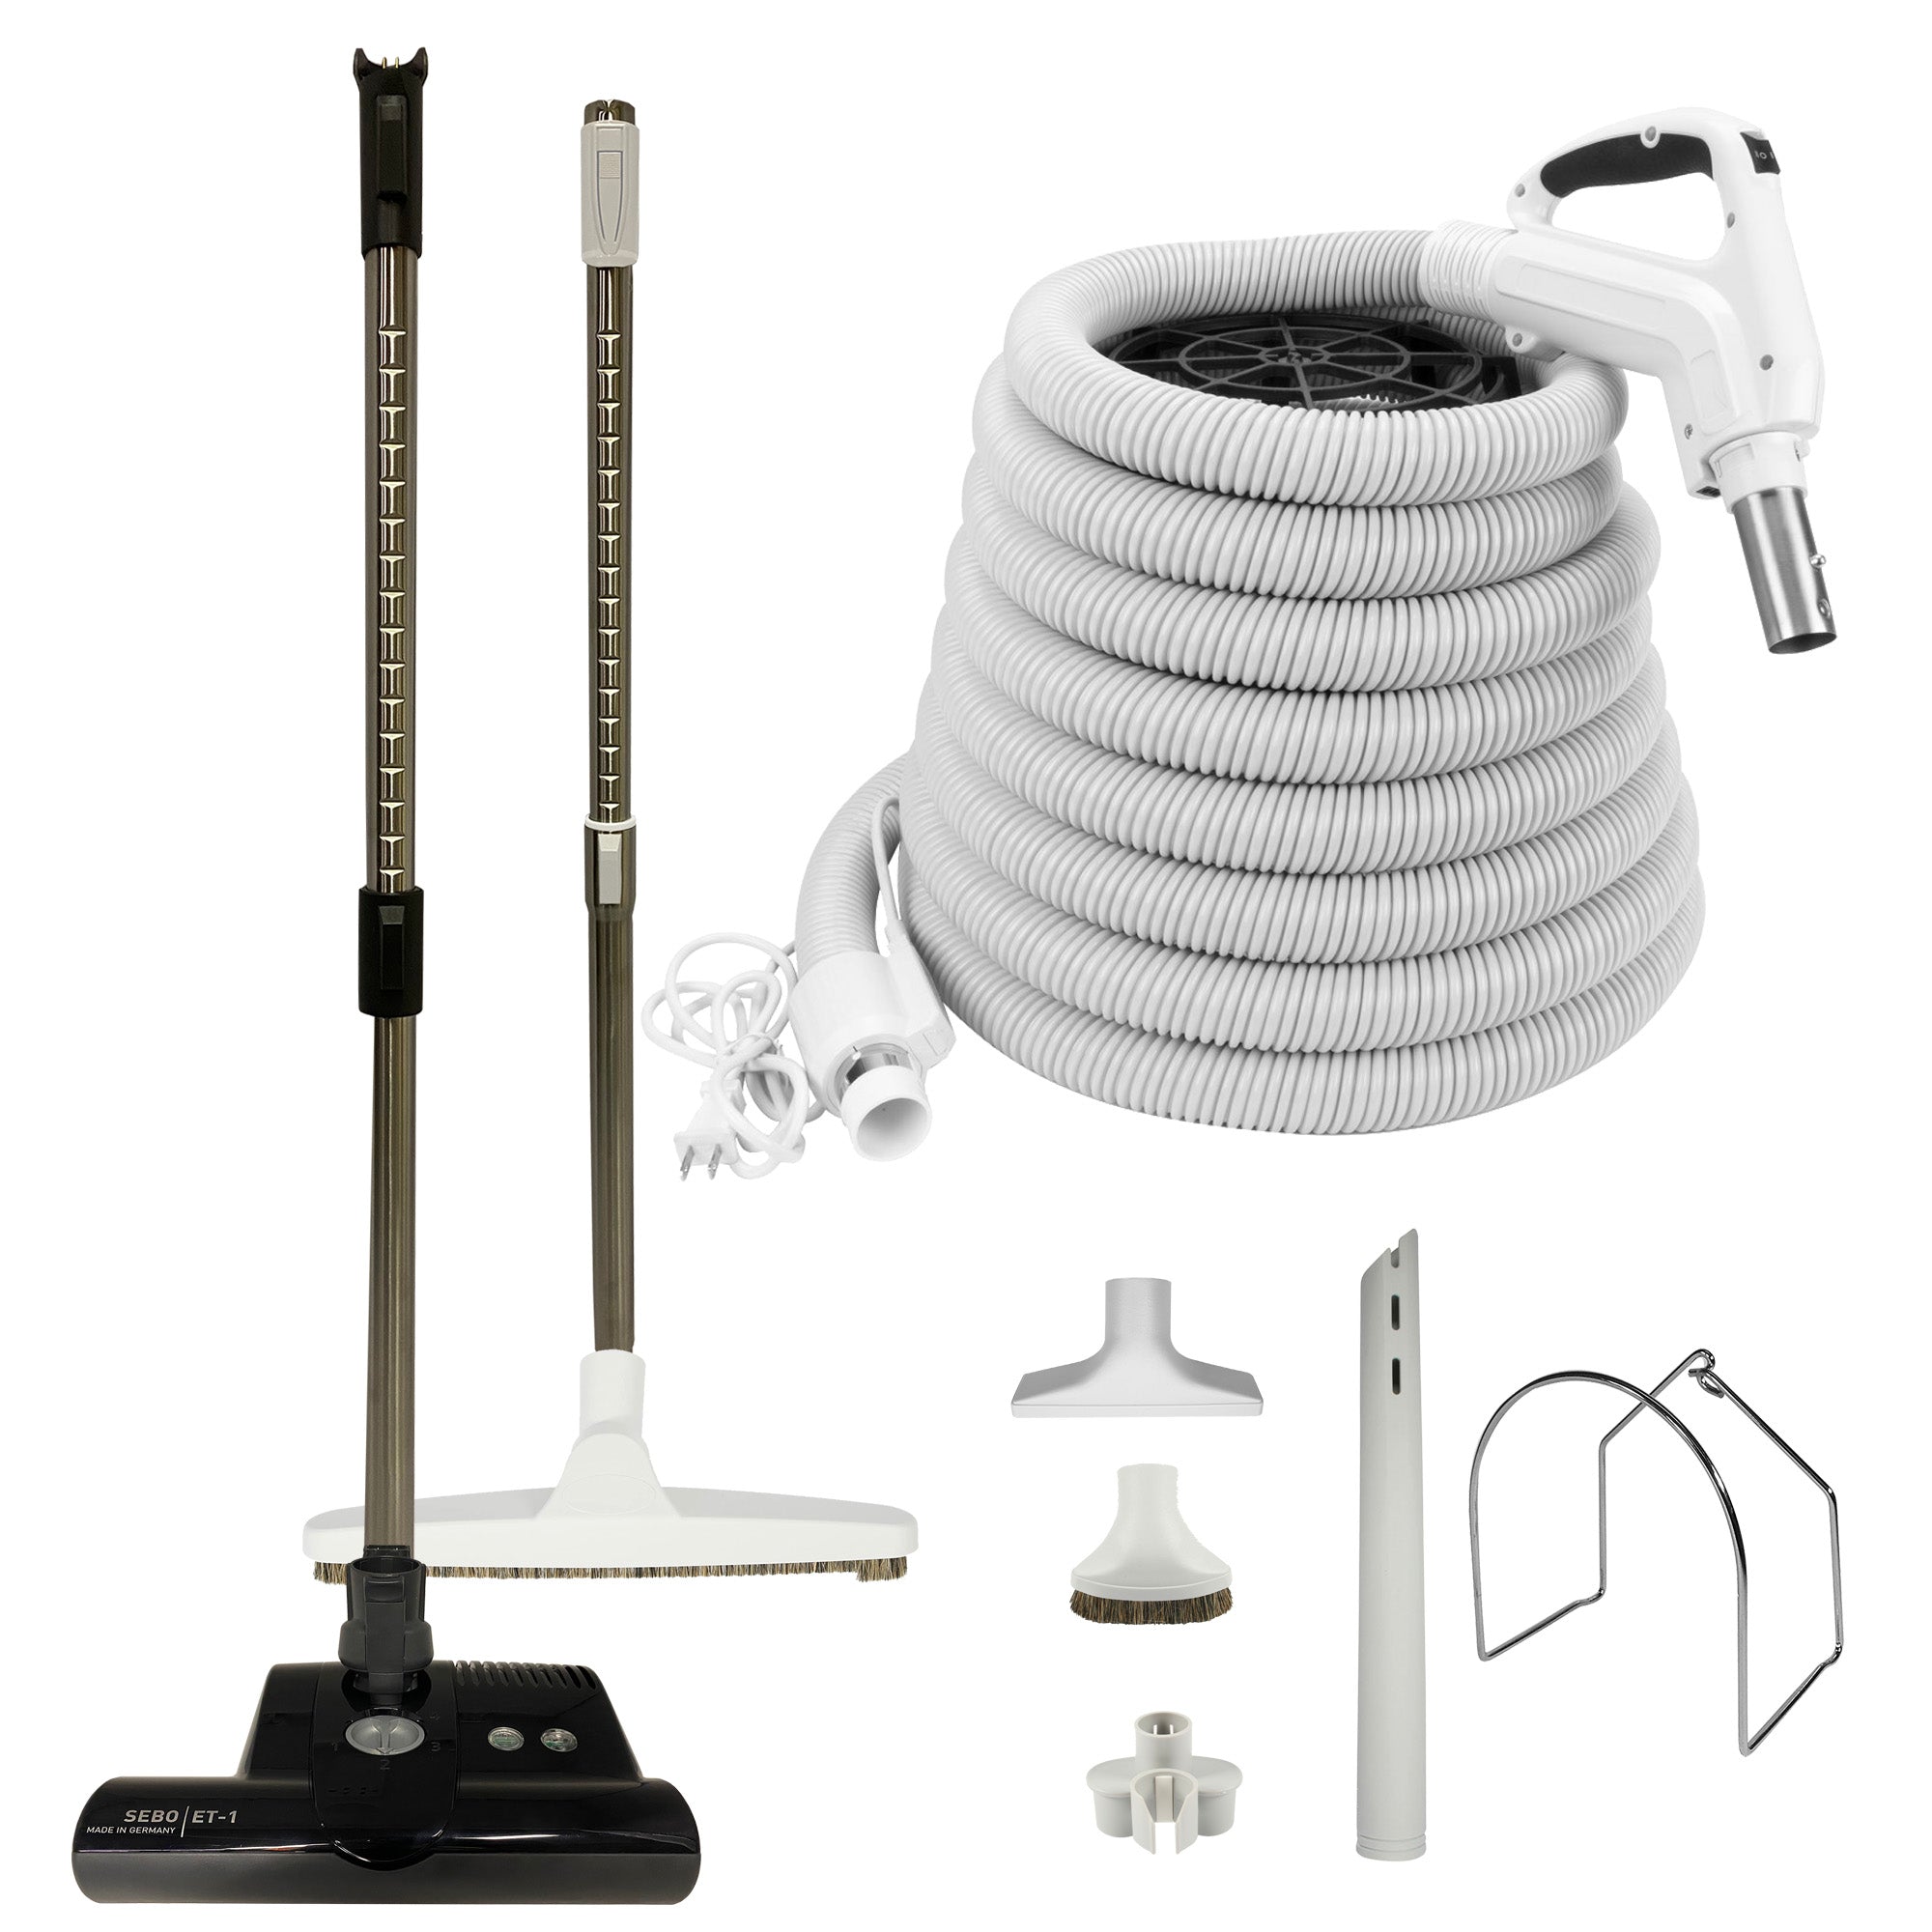 VPC Central Vacuum Accessory Kit with White Hose and SEBO ET-1 Powerhead - Black